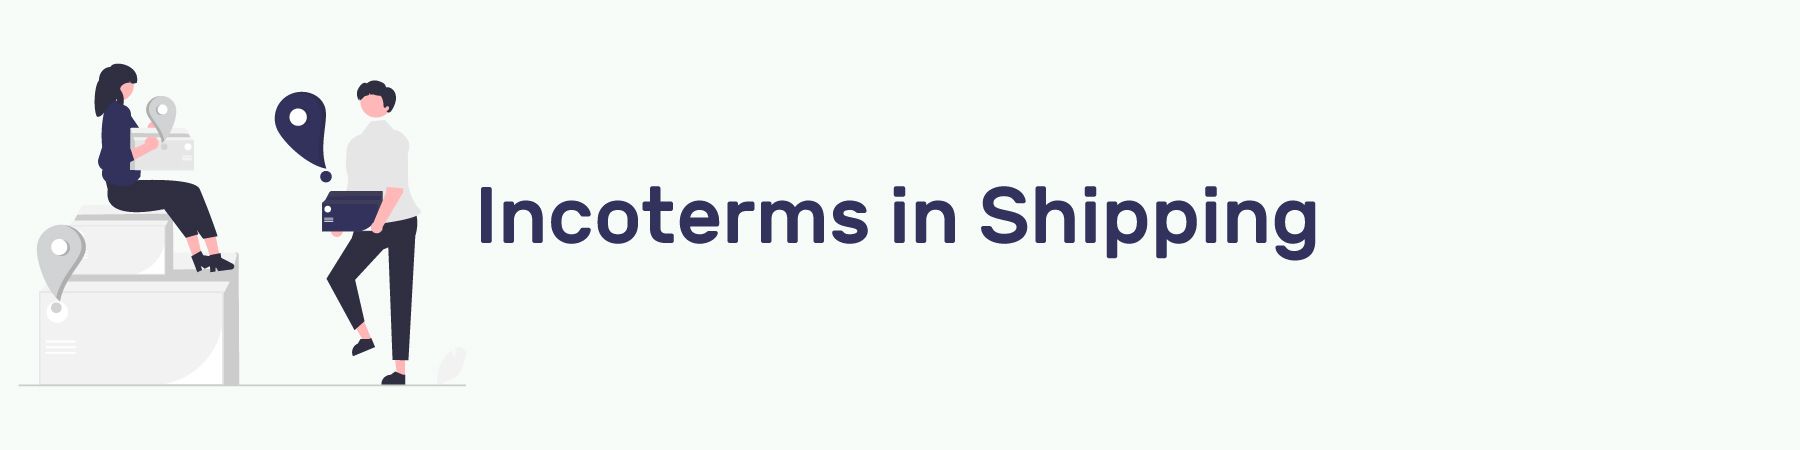 Incoterms in Shipping Section Header